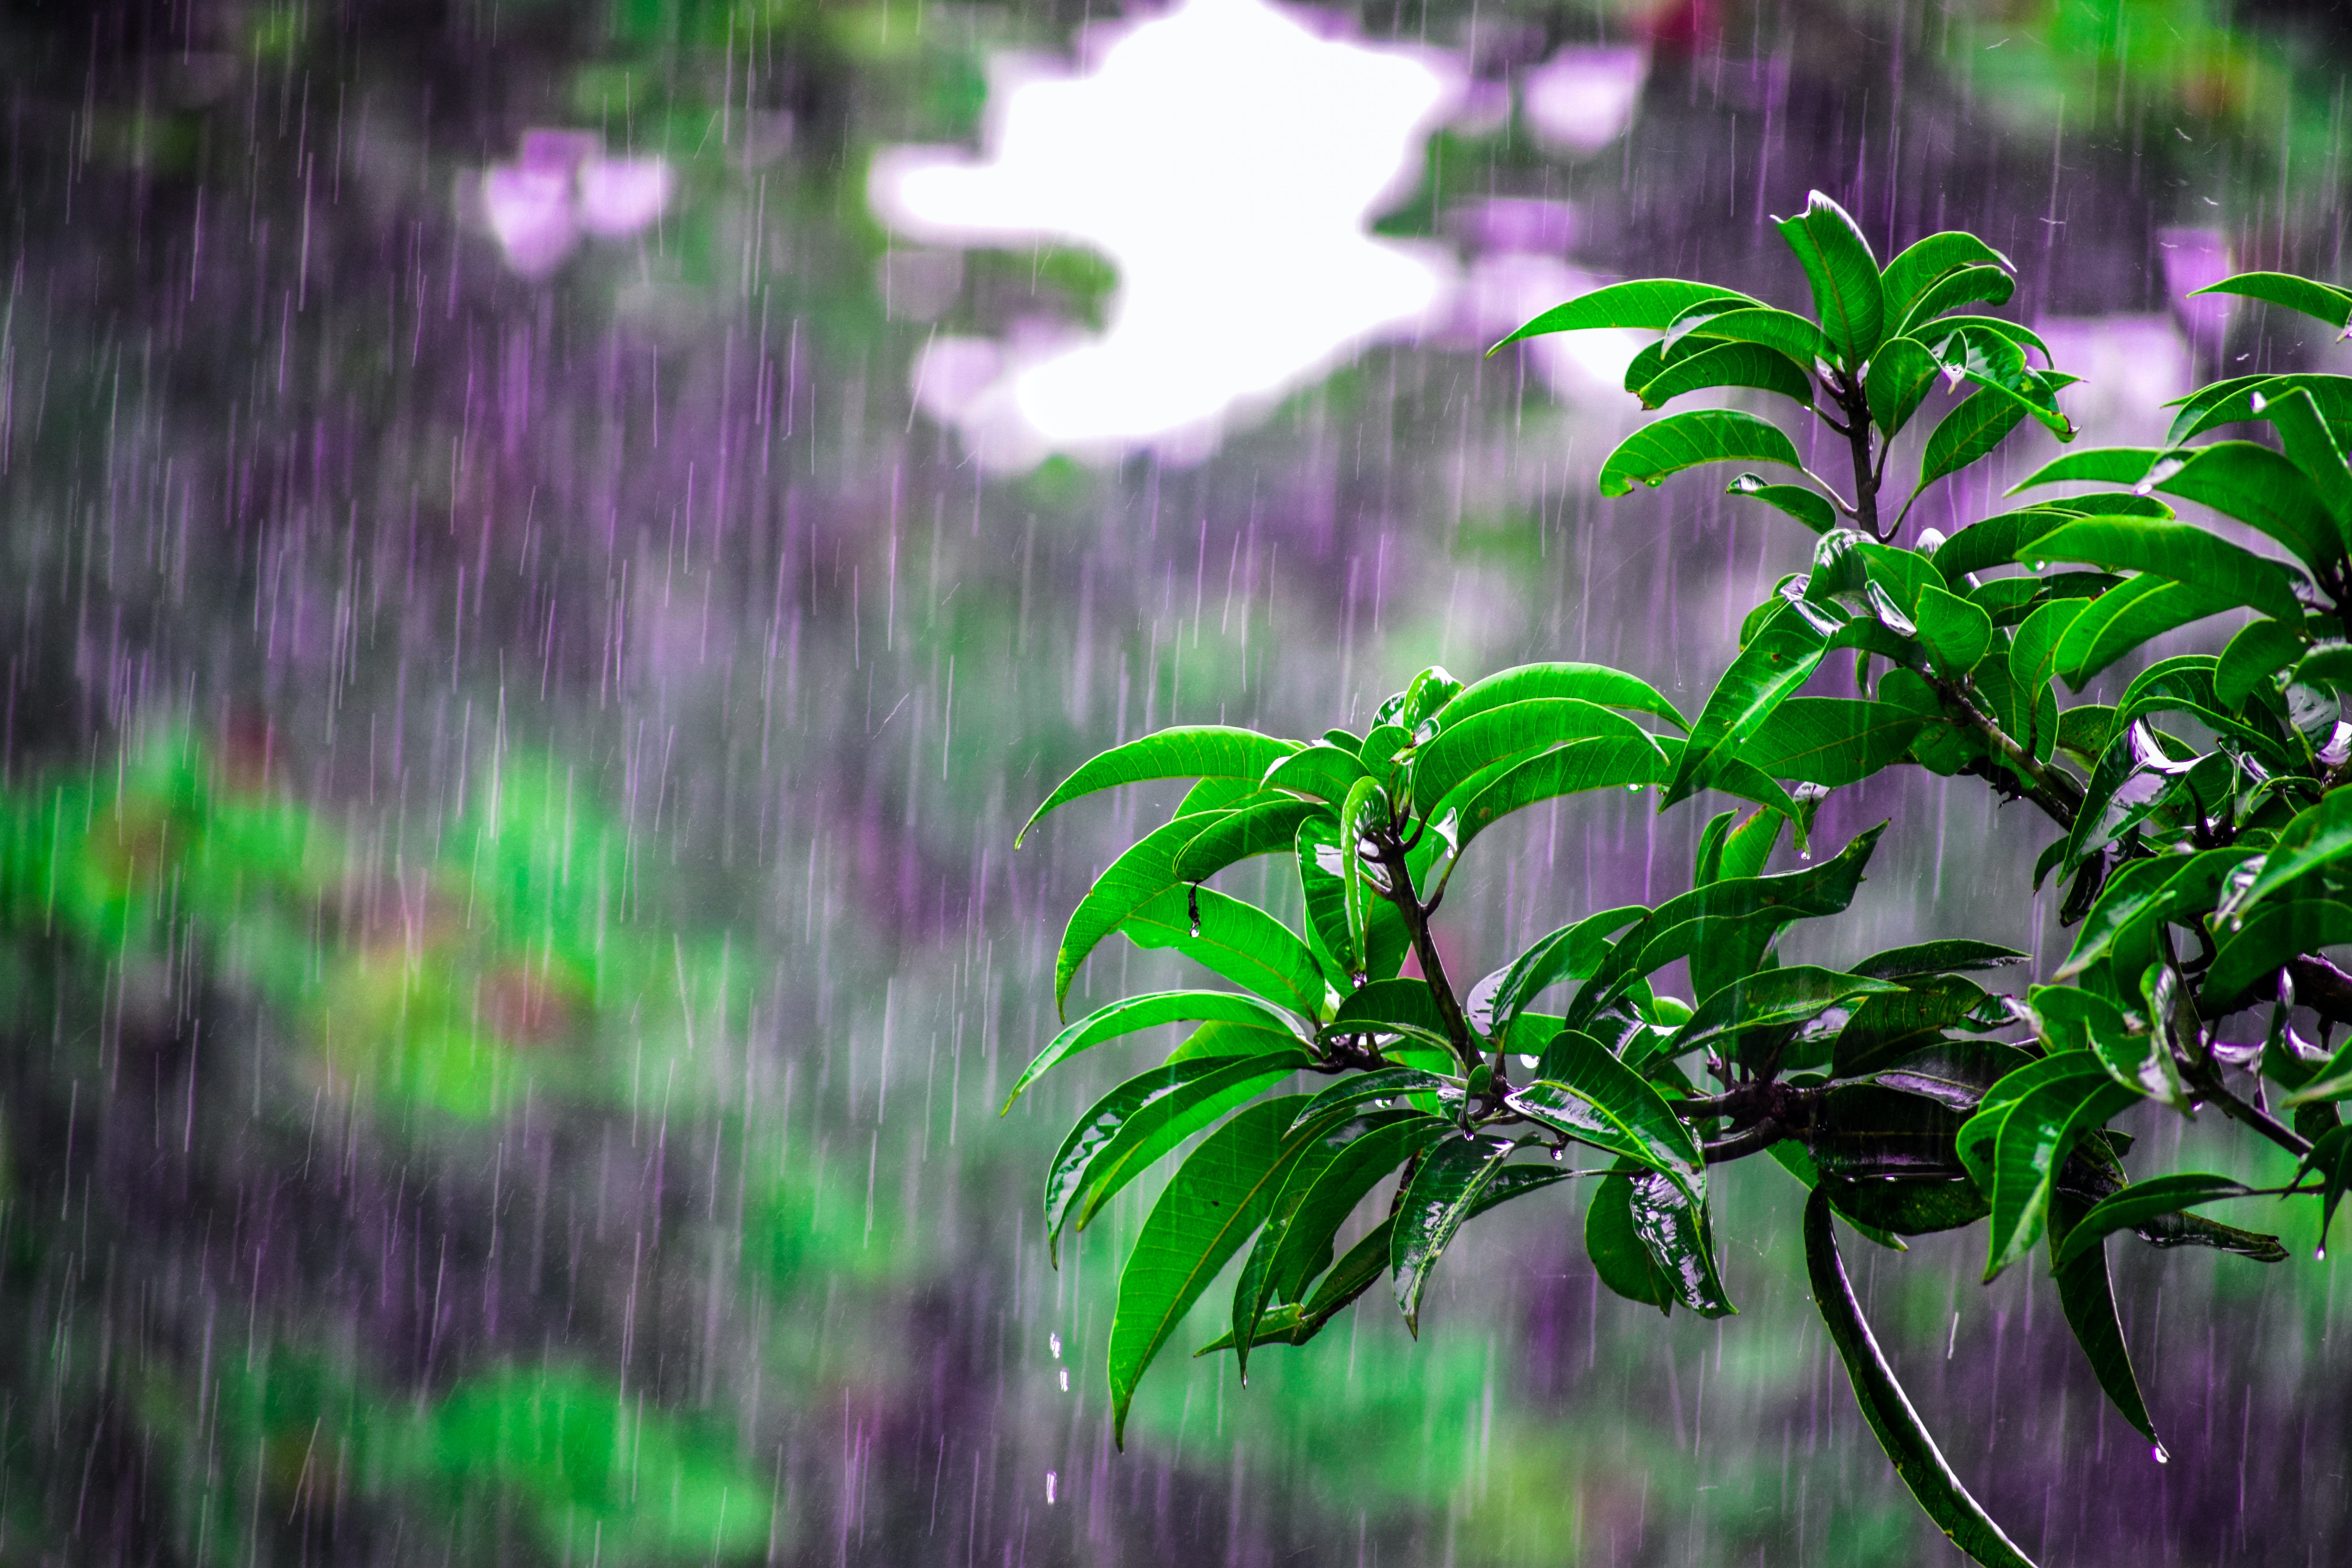 Best Free Rainy Day & Image · 100% Royalty Free HD Downloads